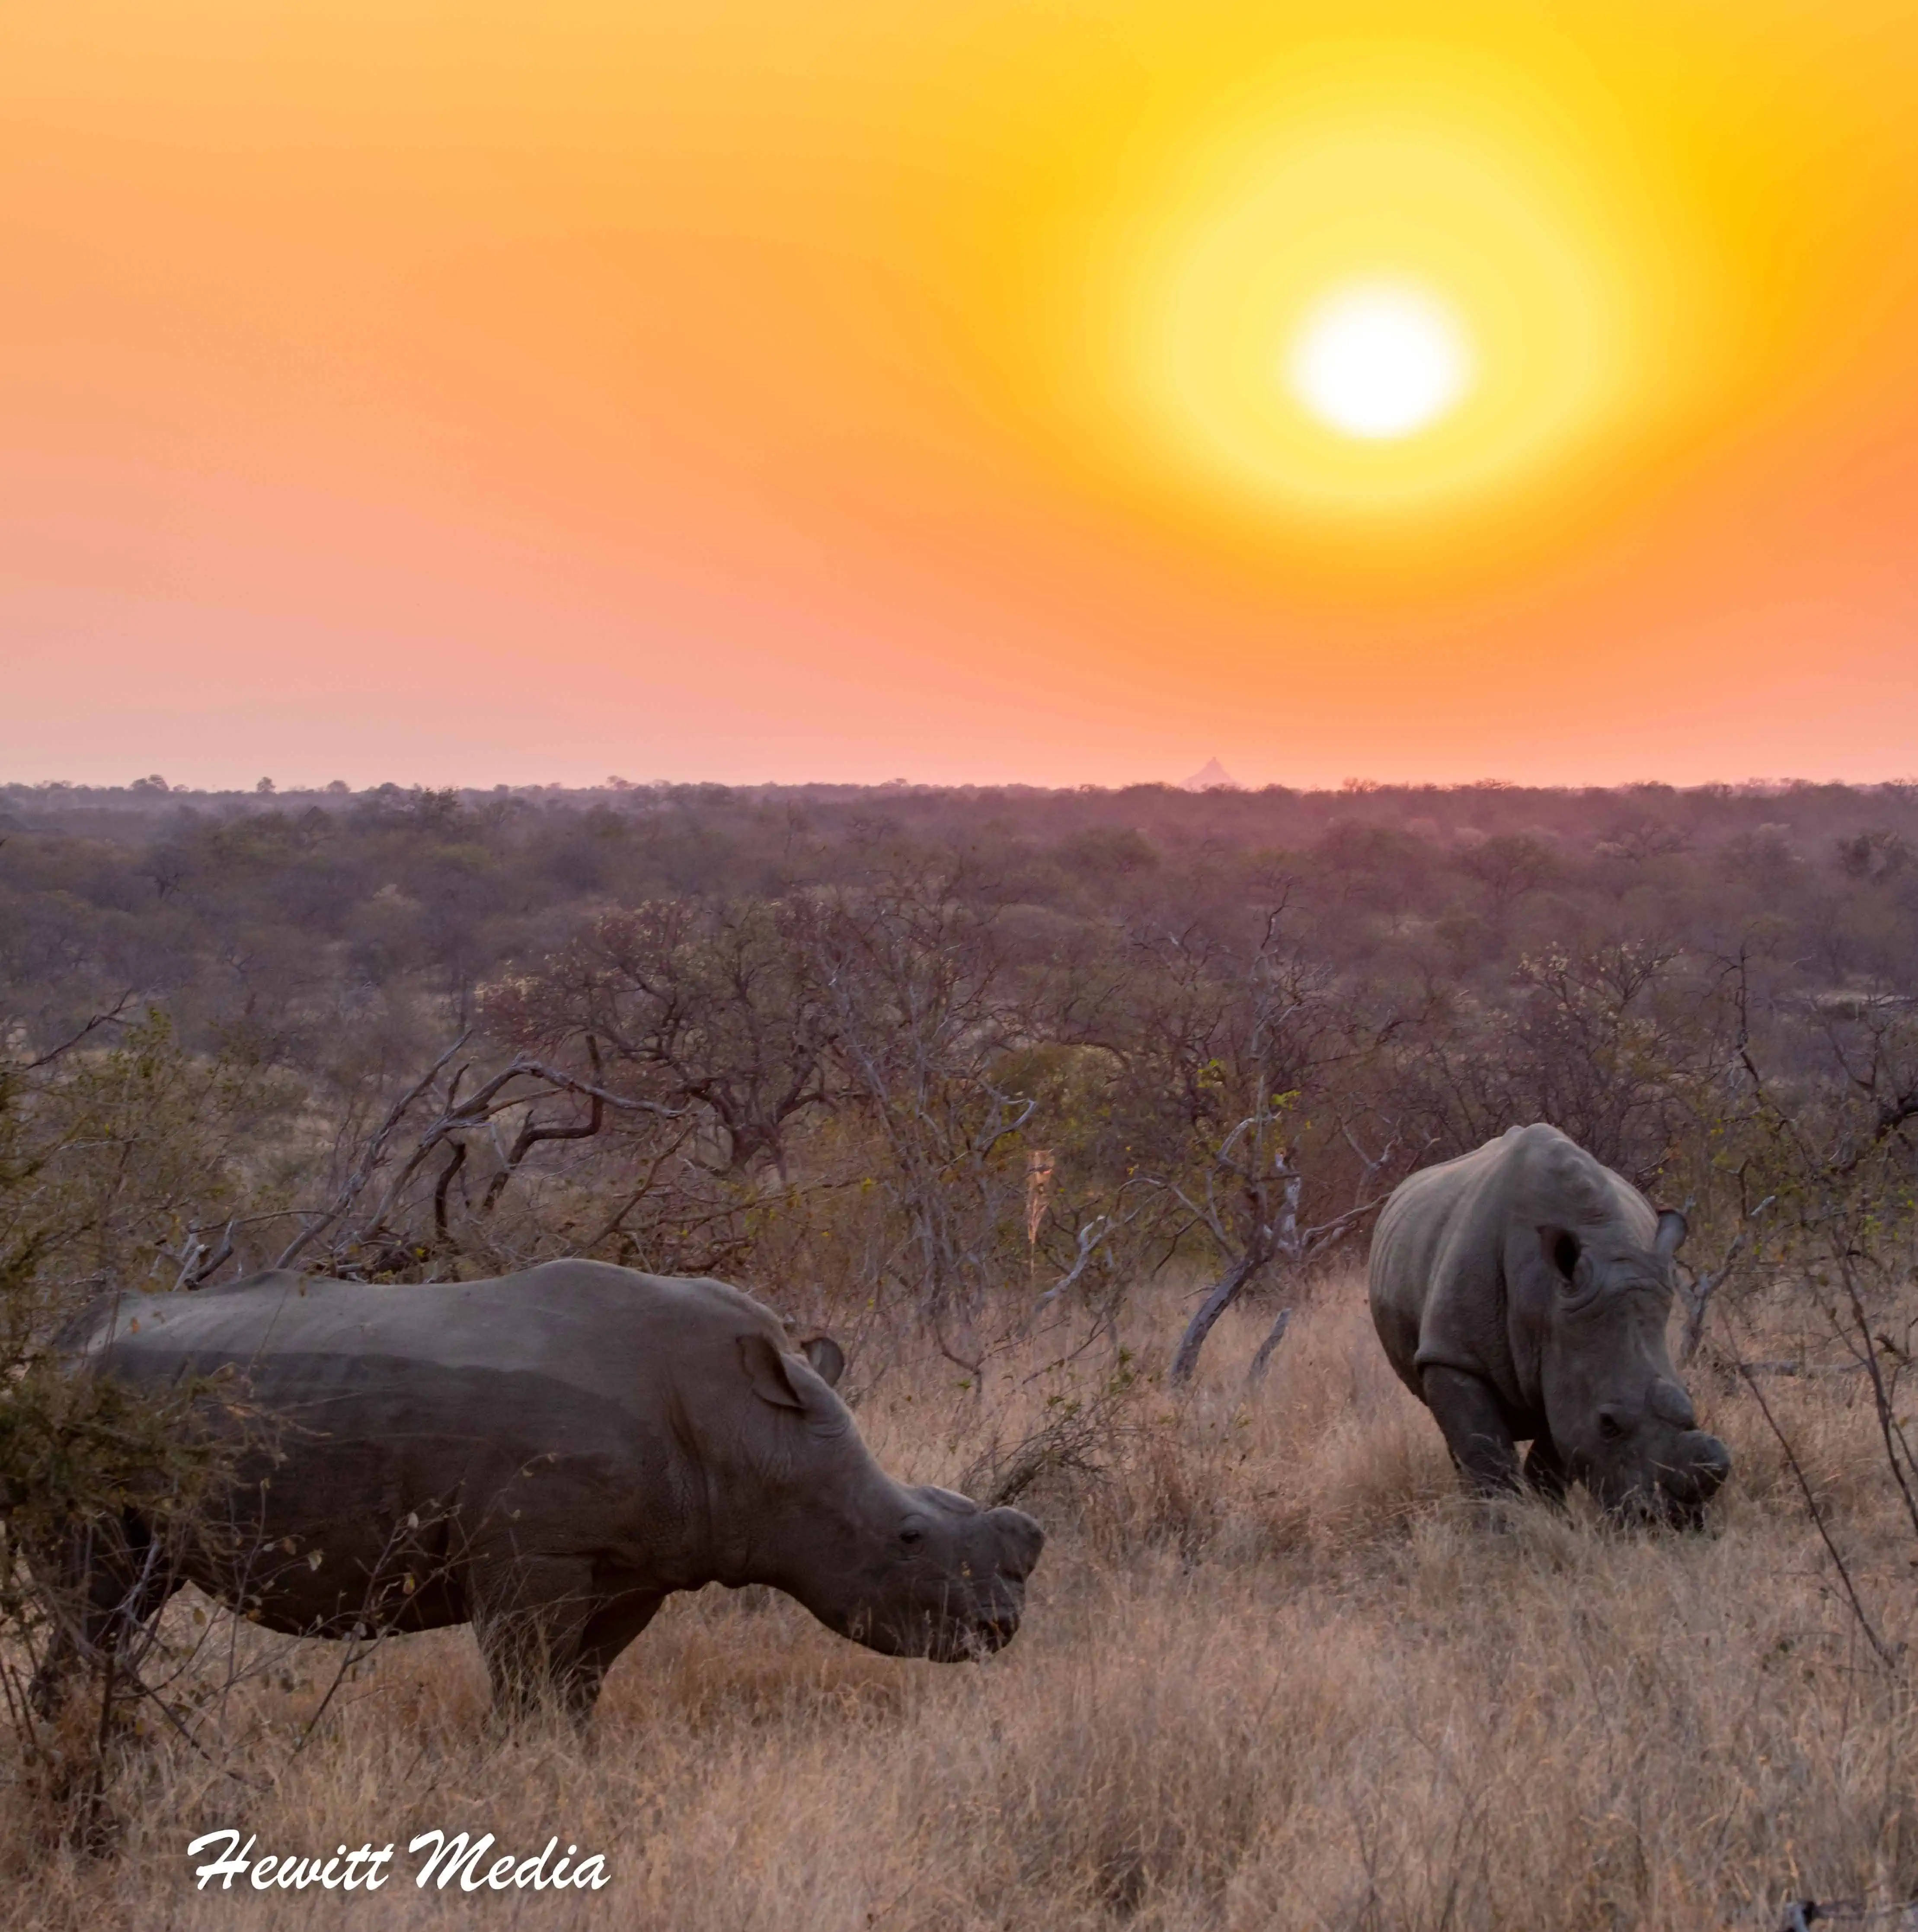 Instagram Travel Photography: Southern White Rhinos at Sunset